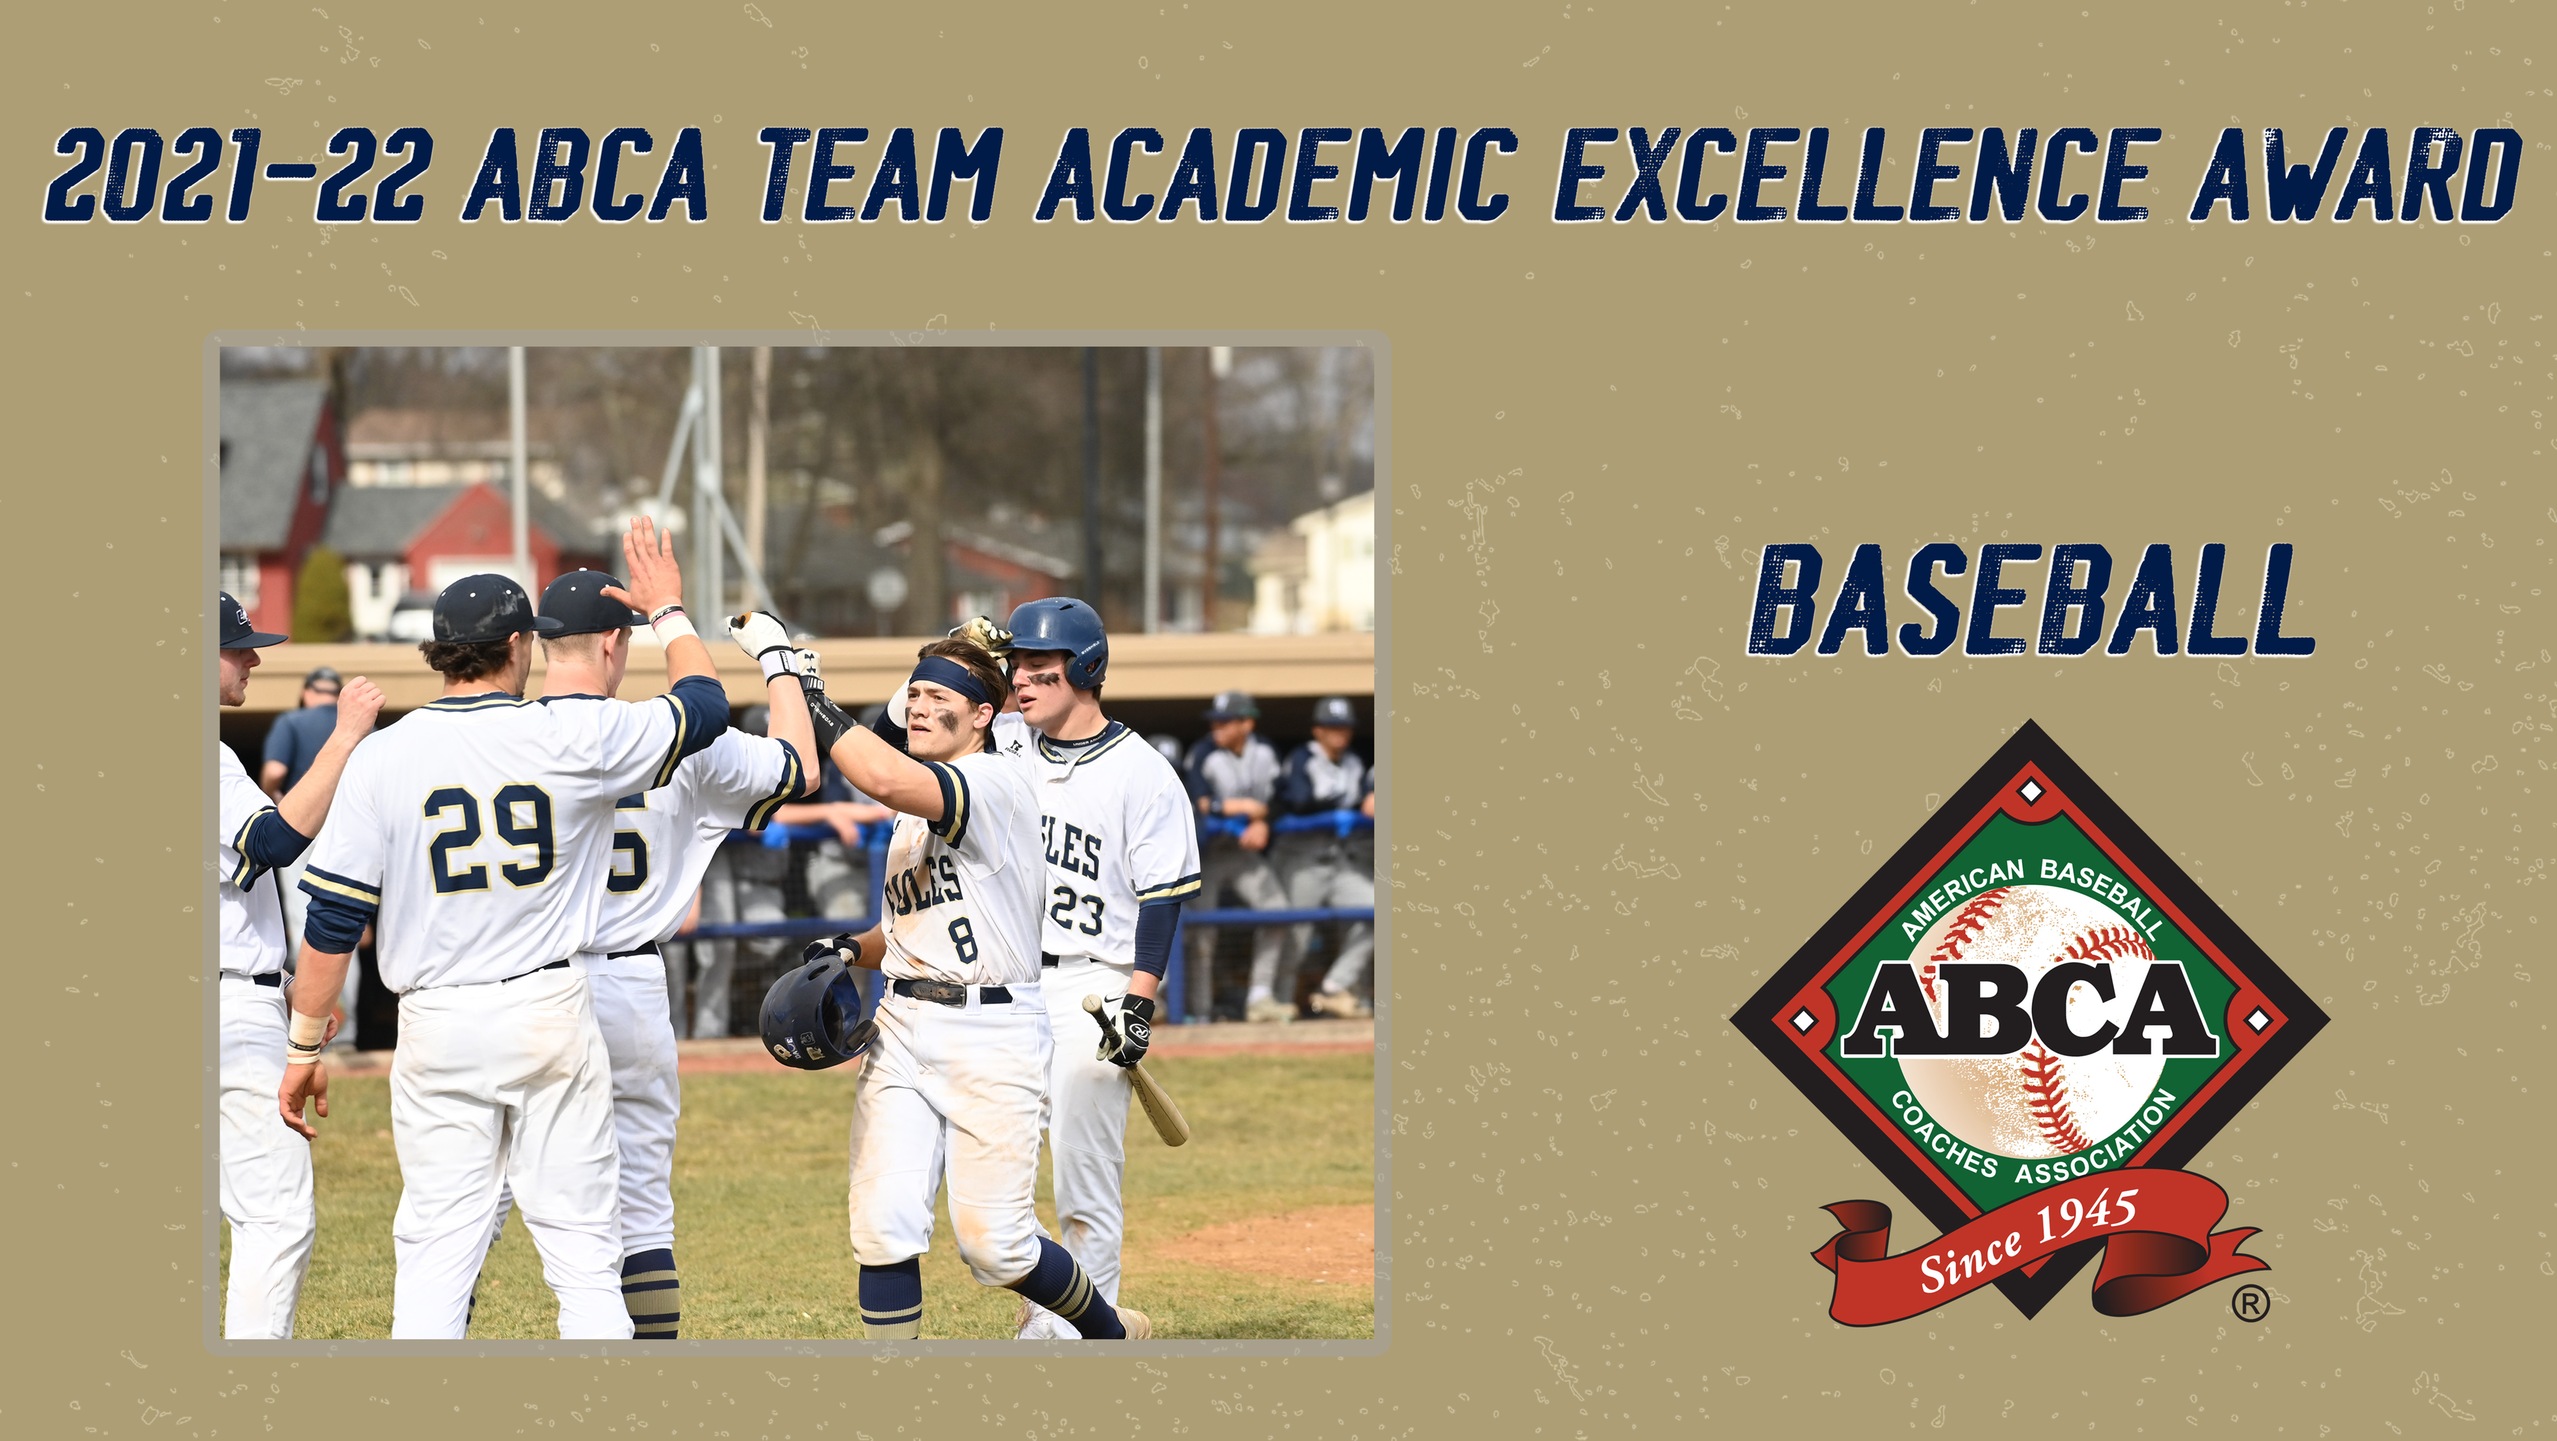 Baseball Honored With ABCA Team Academic Excellence Award